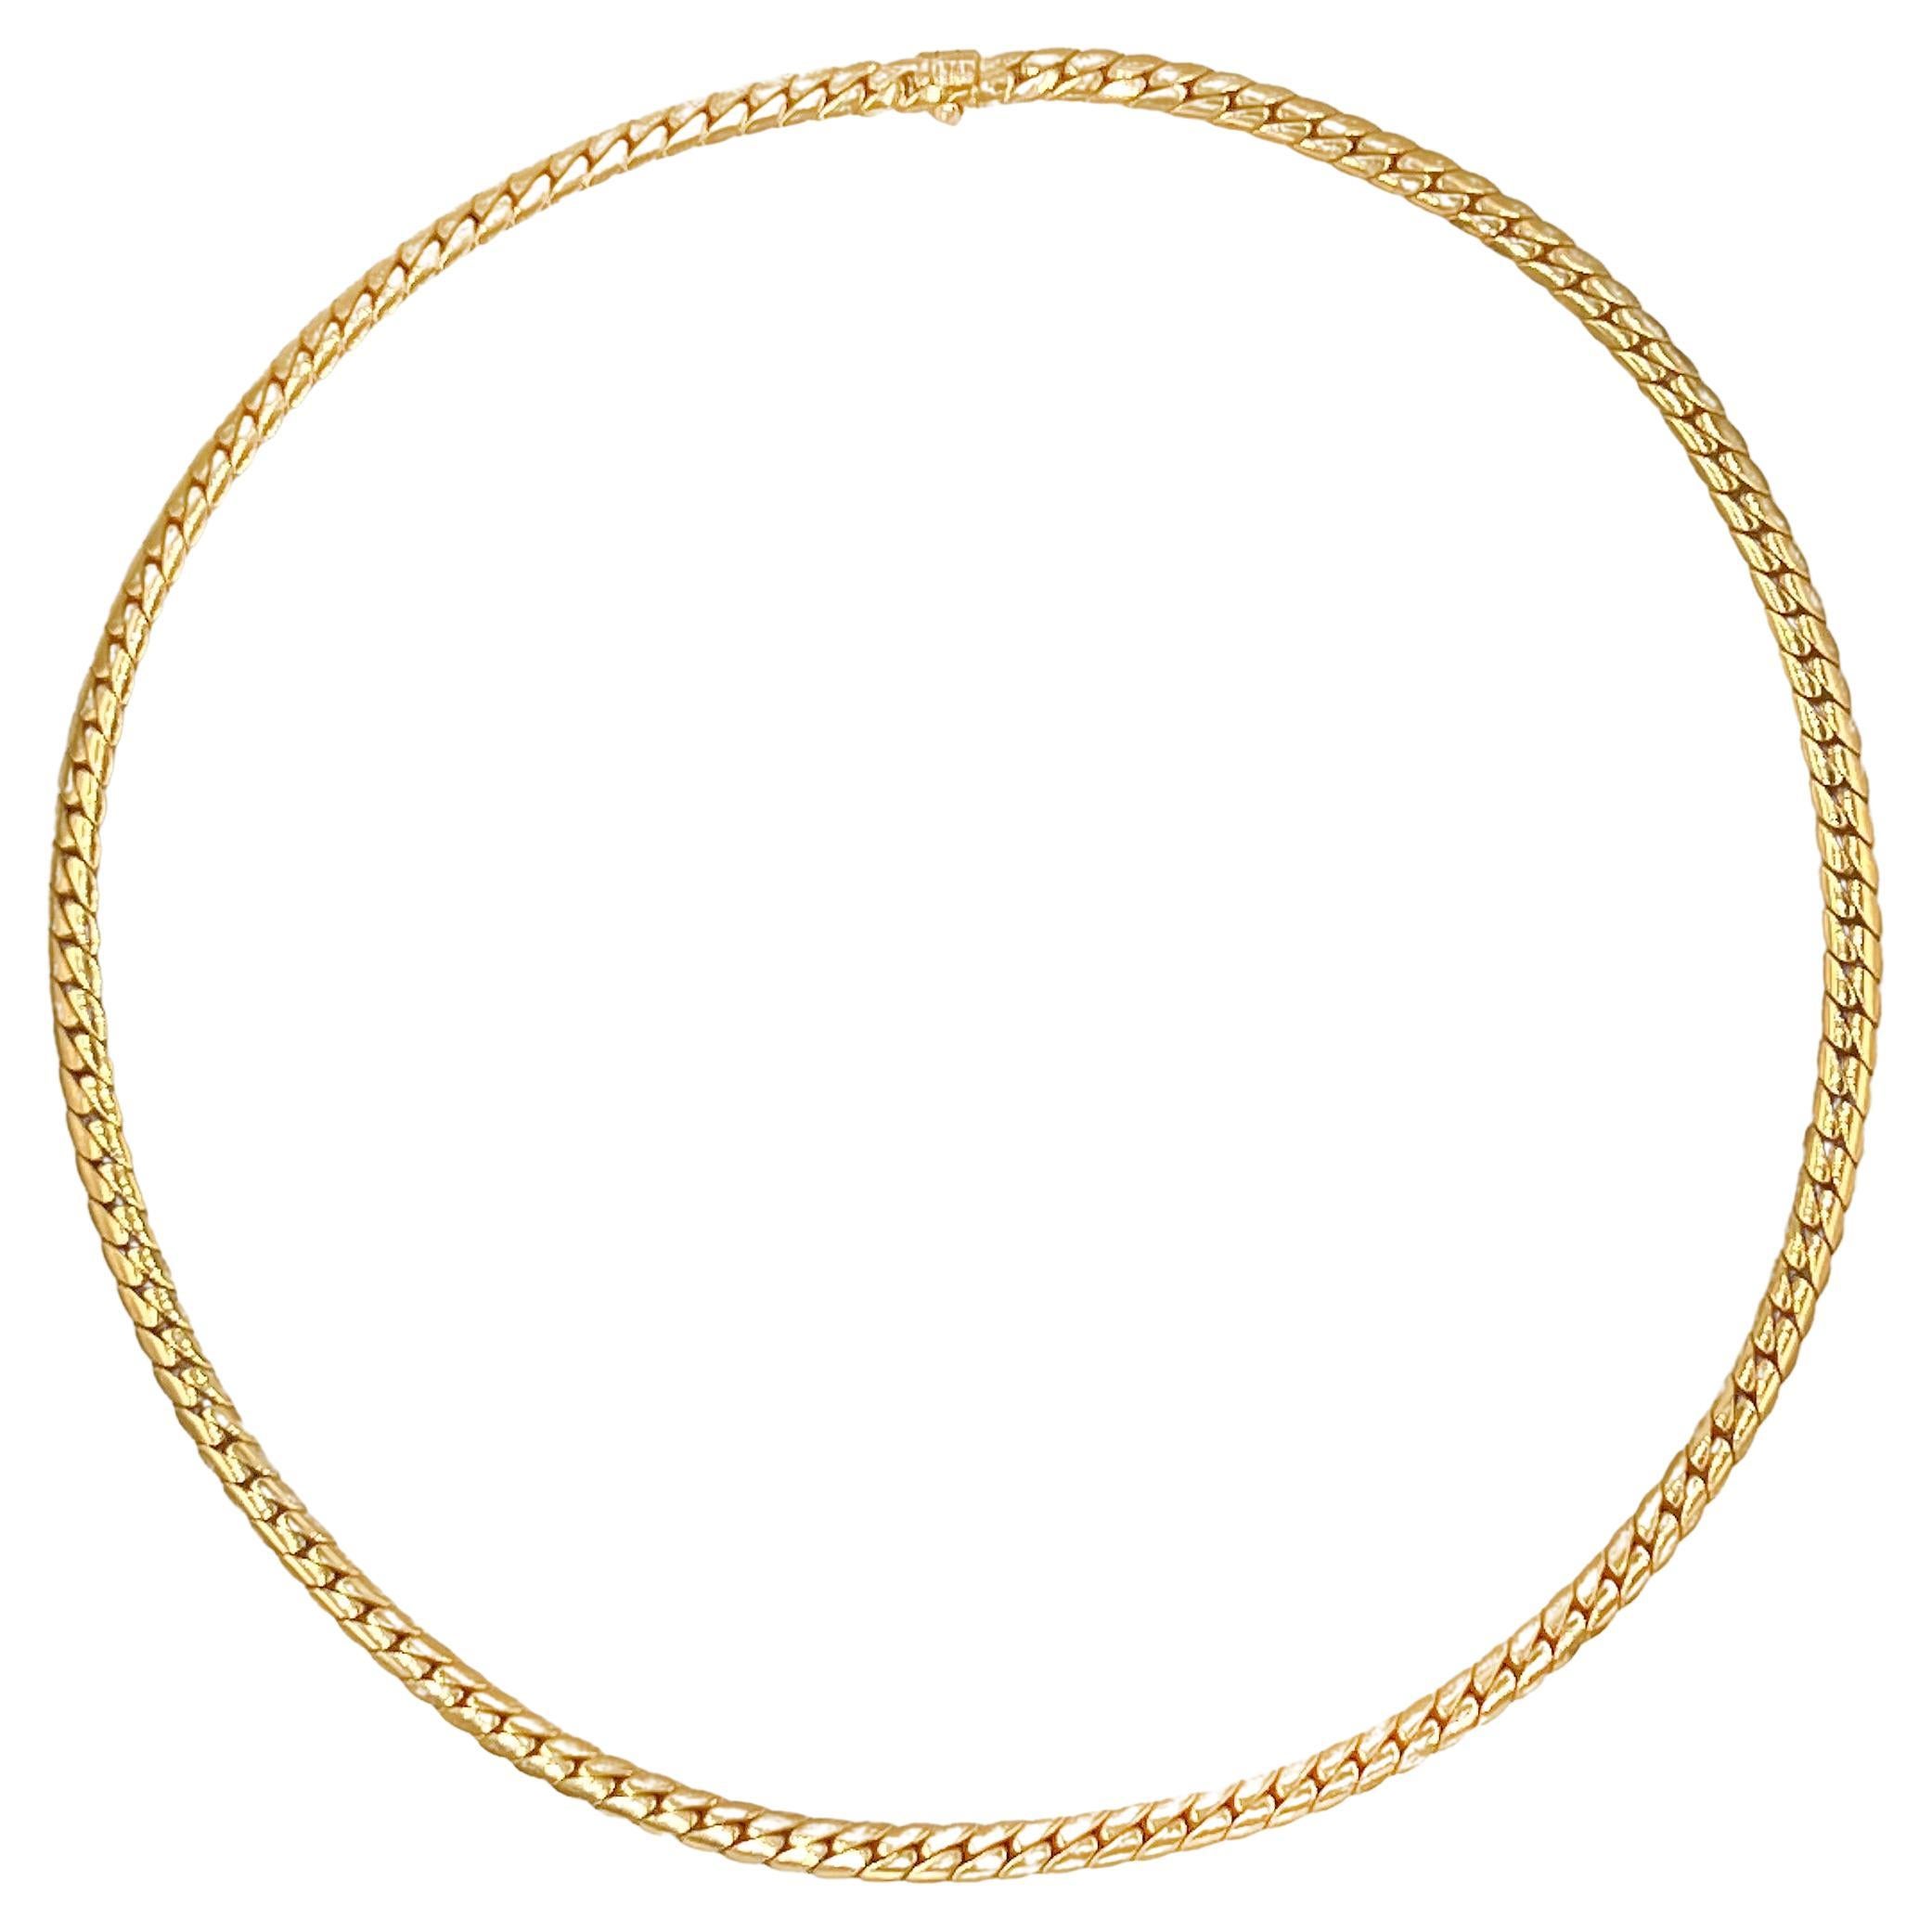 Cartier 18k Yellow Gold Link Chain Necklace